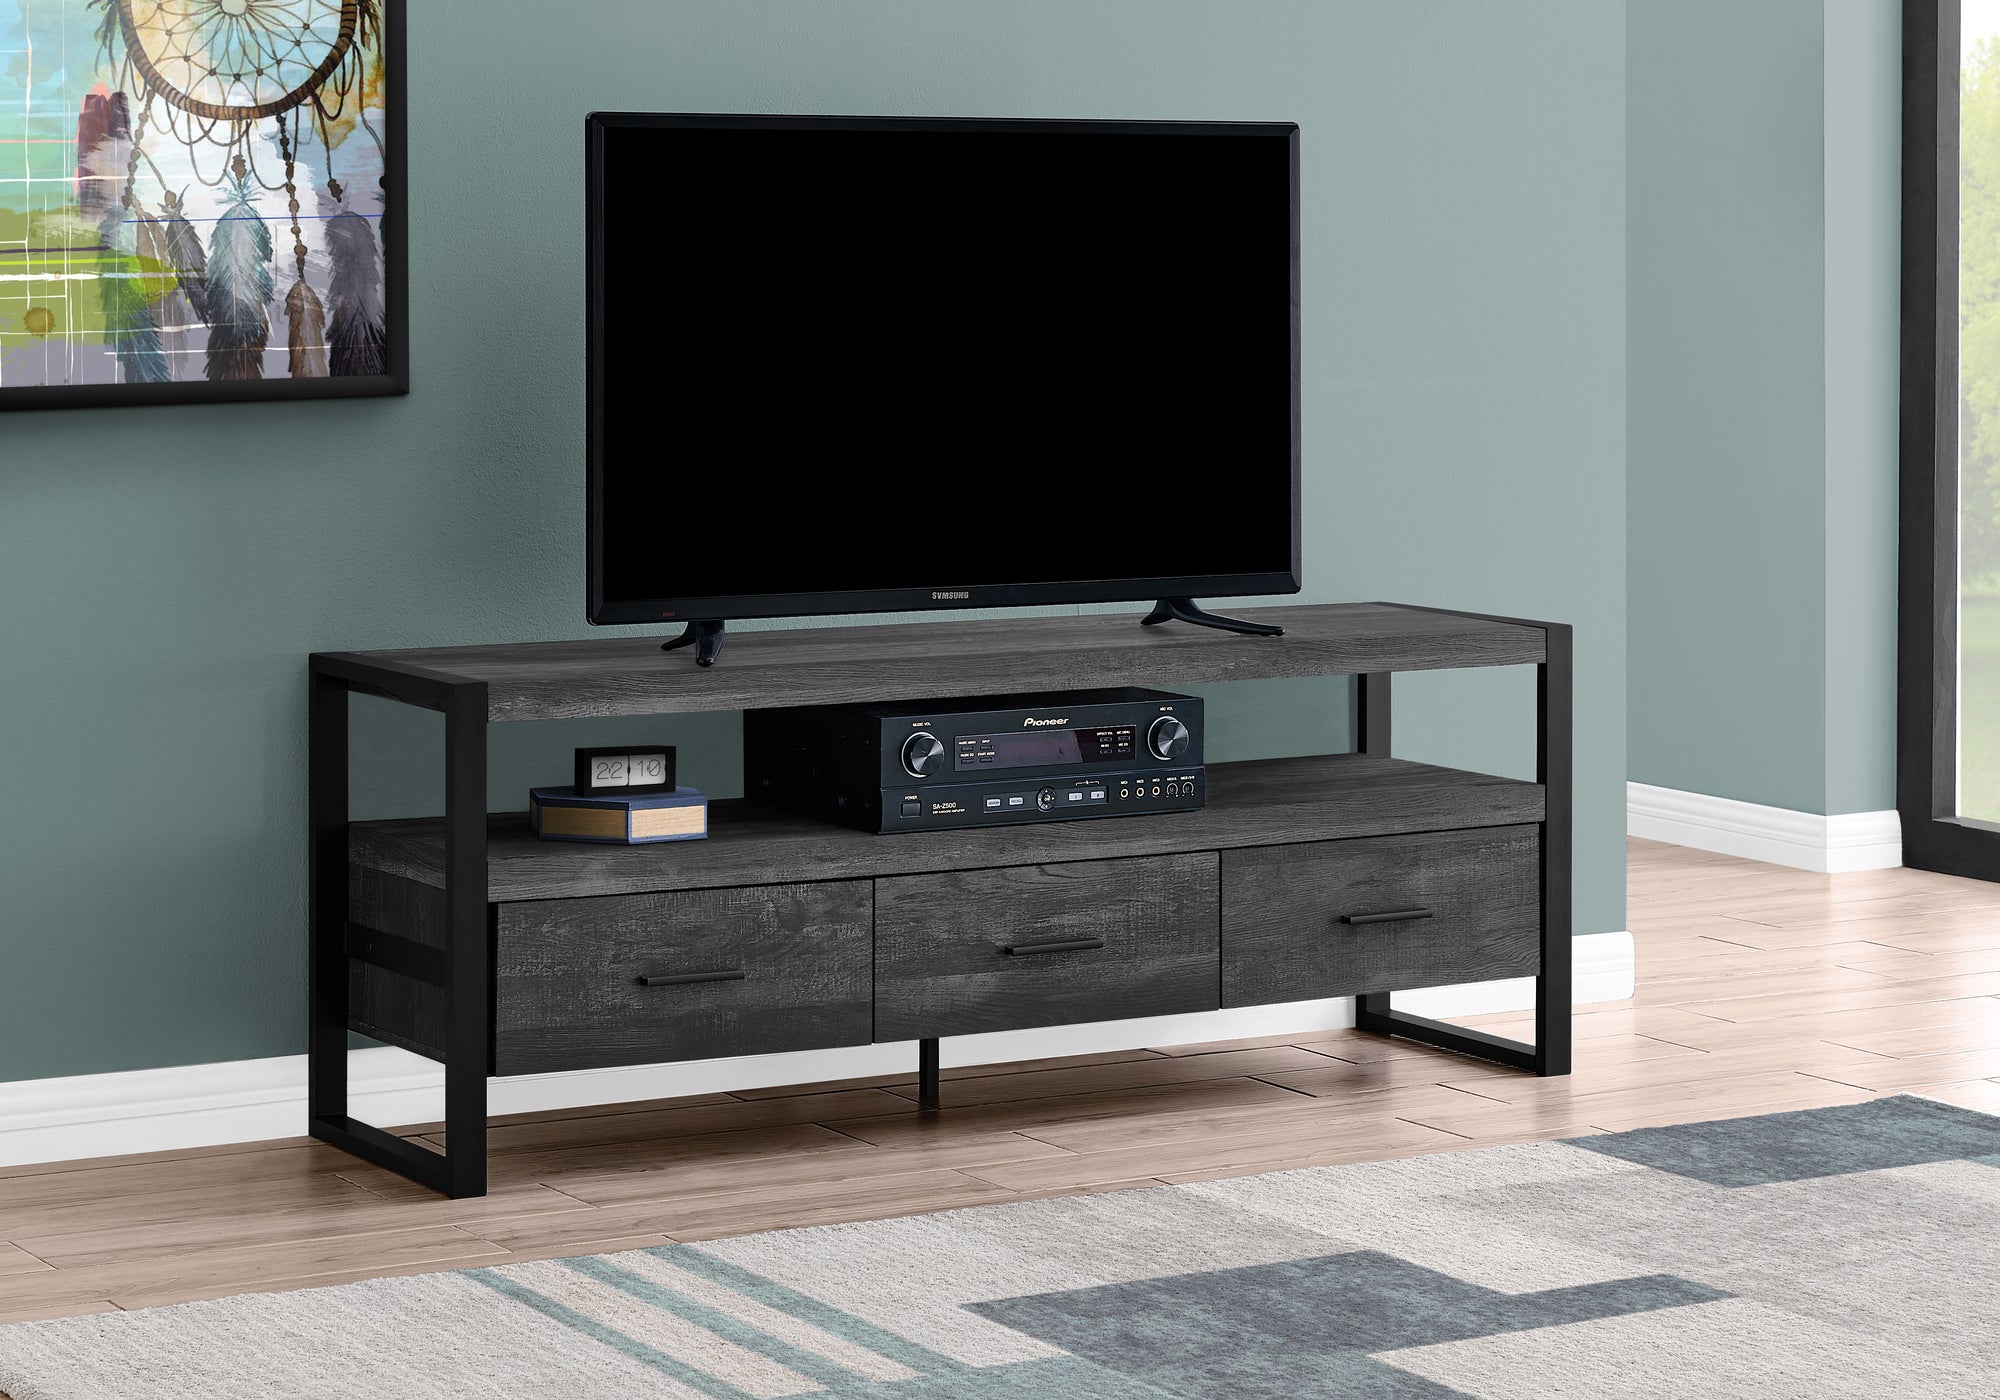 I 2823 - TV STAND - 60"L / BLACK RECLAIMED WOOD-LOOK / 3 DRAWERS BY MONARCH SPECIALTIES INC